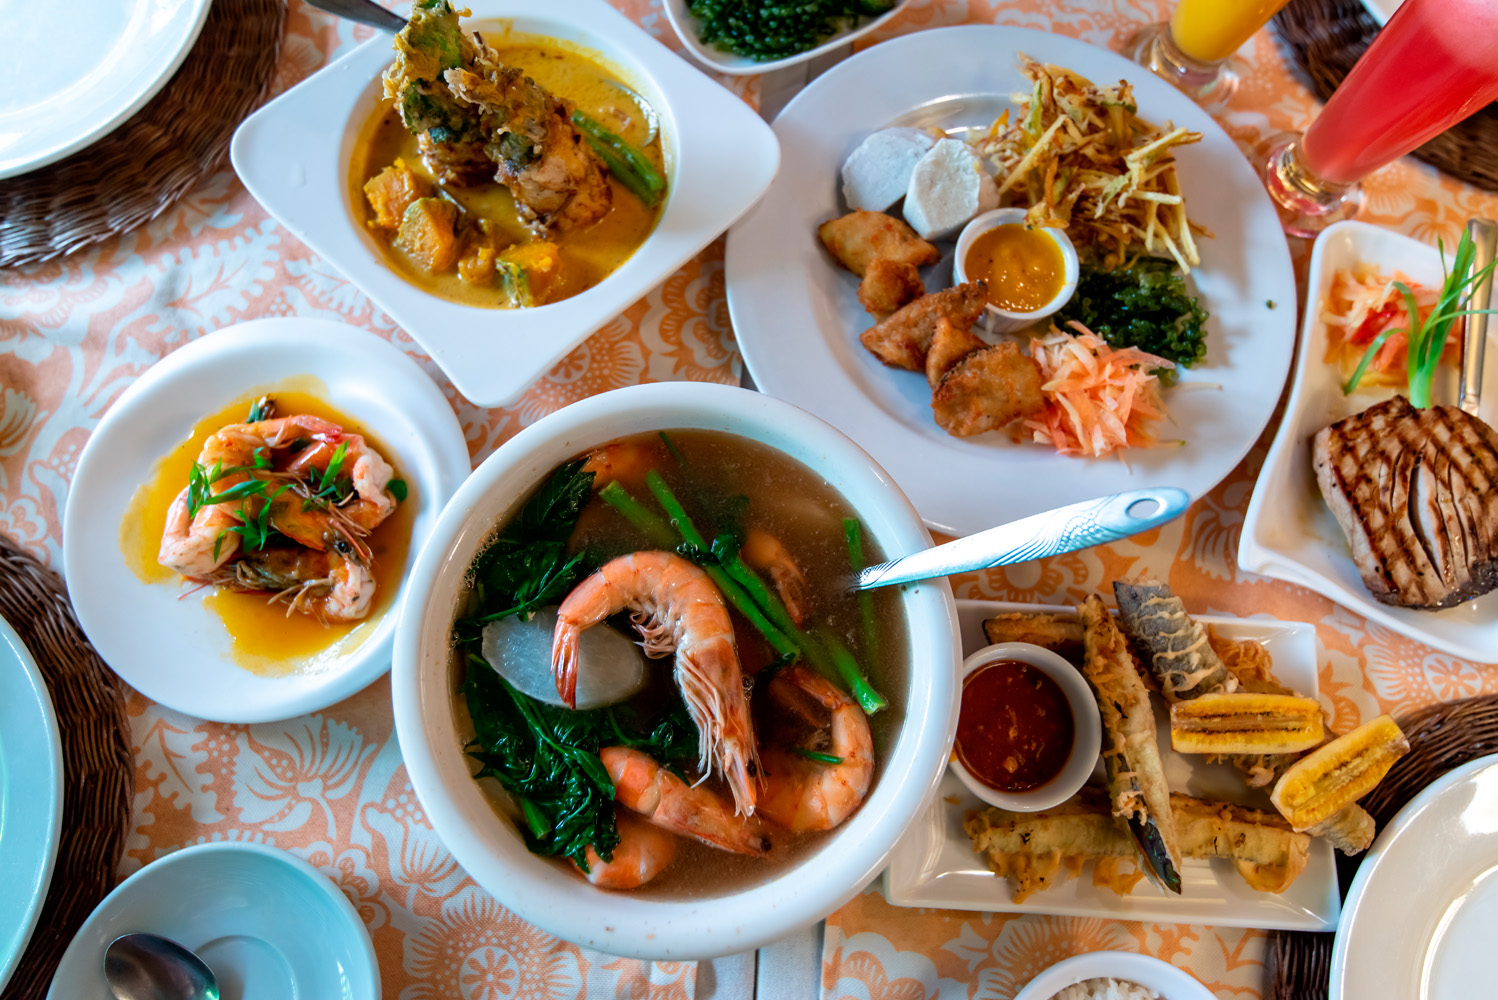 Deep-fried eggplant, Tuna Steak and Steamed Shrimp dishes on the table, Philippines